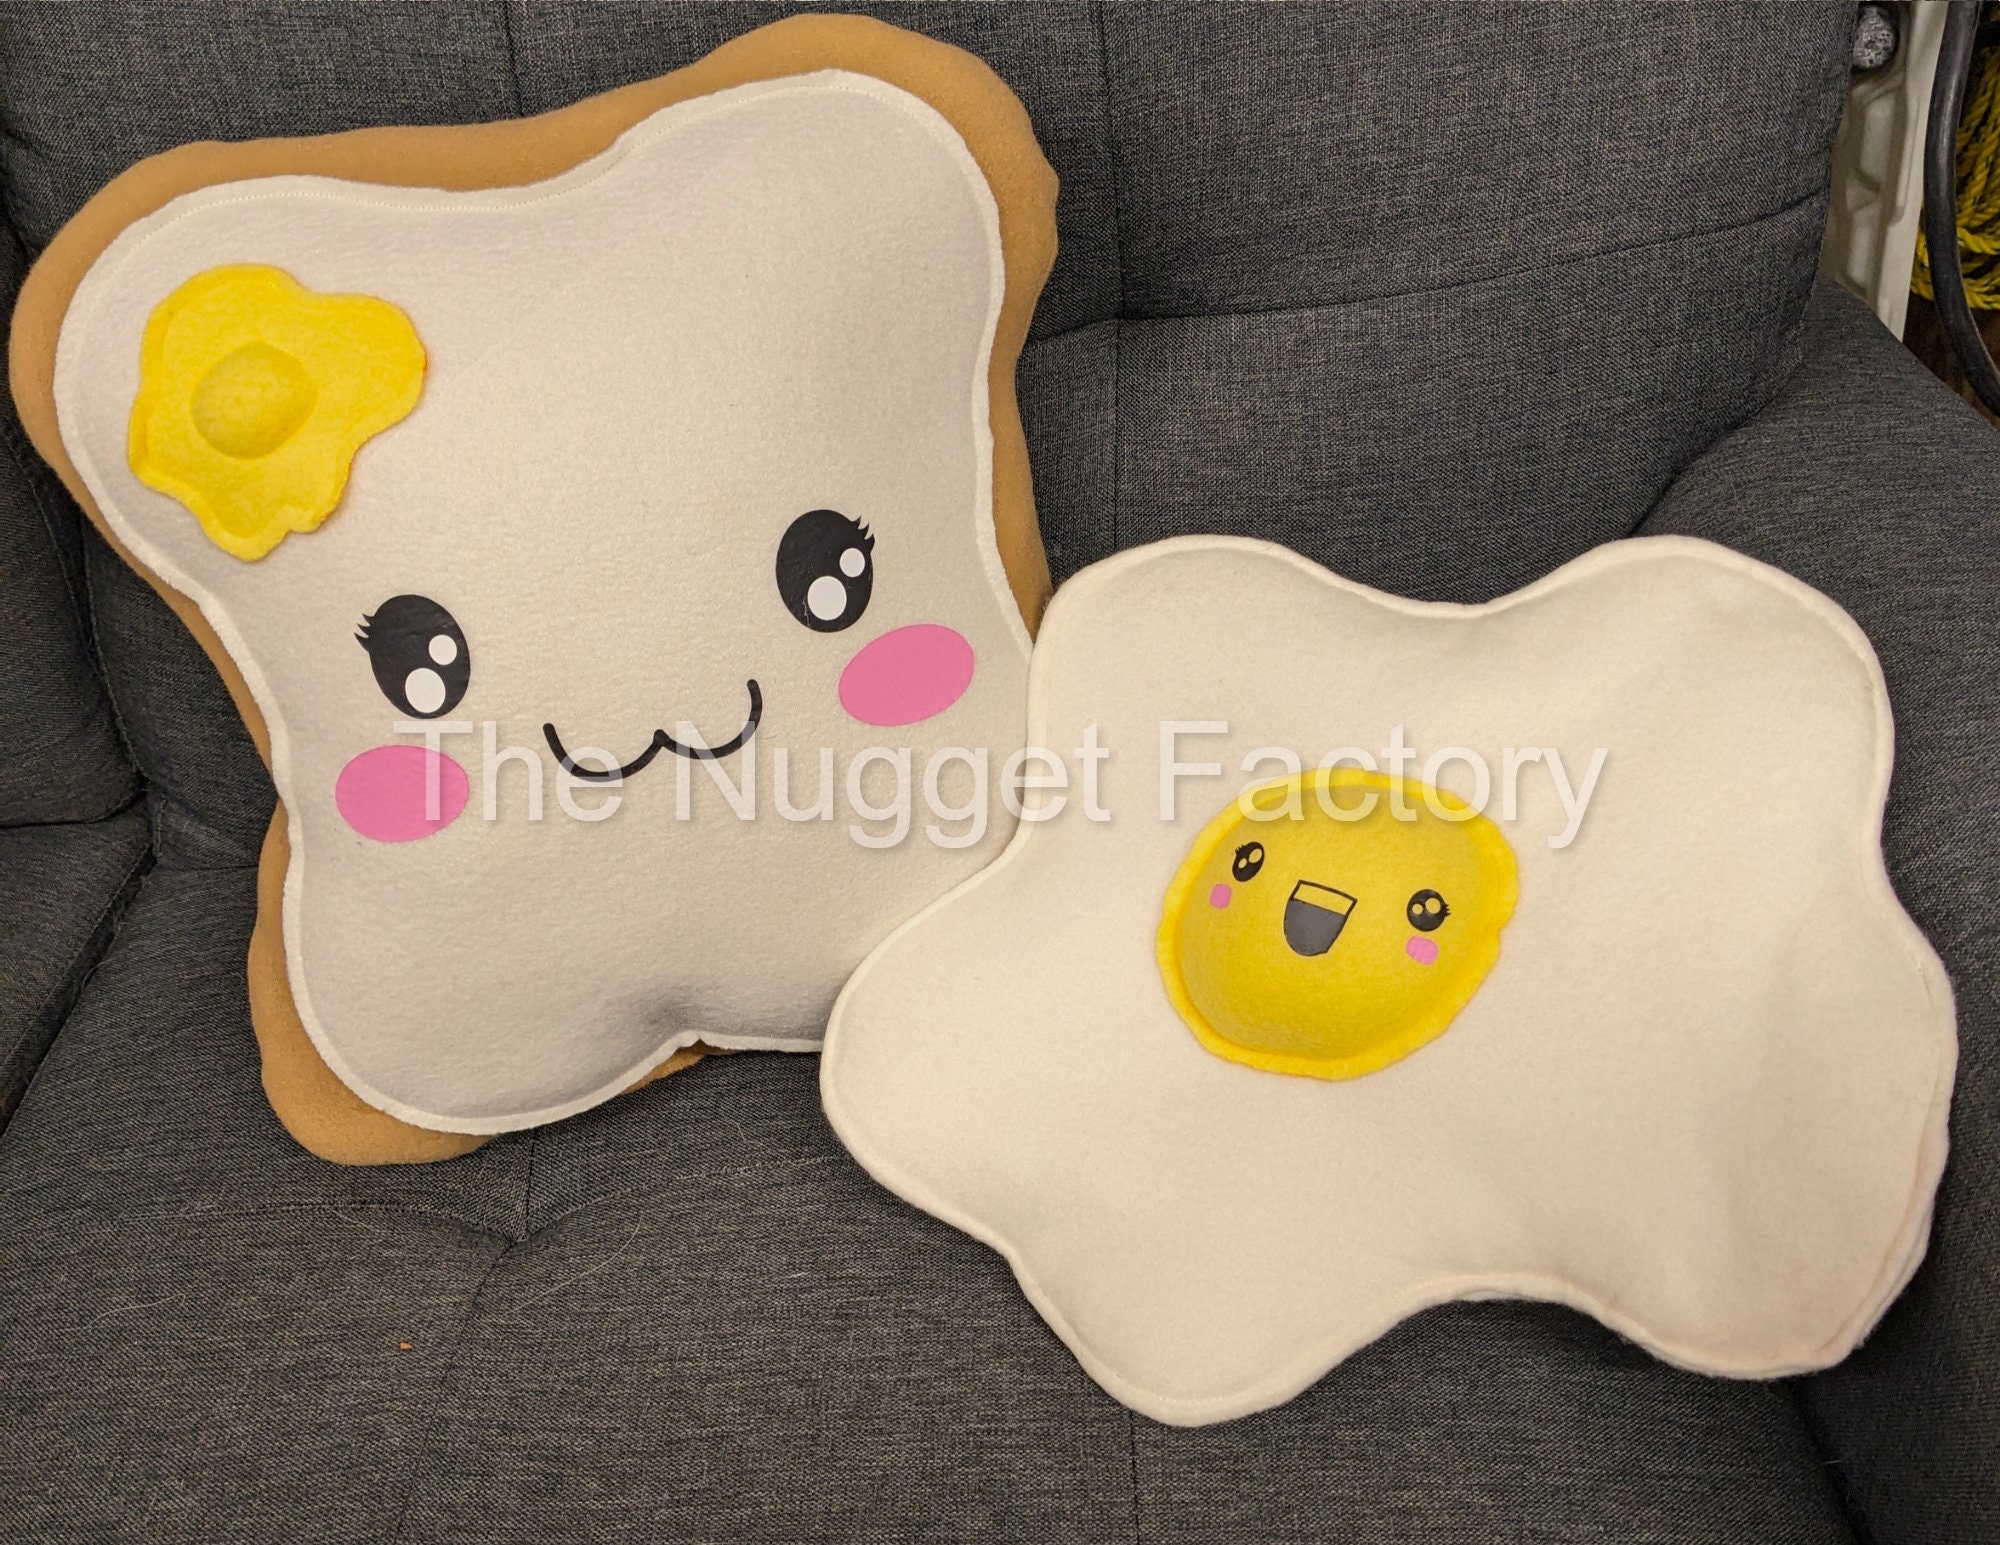 Toast Bread Pillow Cushion with Aggrieved Expression, Kawaii Plush Toy  Funny Food Plush Cushion for Office Dorm Bedroom Seat,Plush Cushion Gift  for Birthday, Valentine, Christmas 